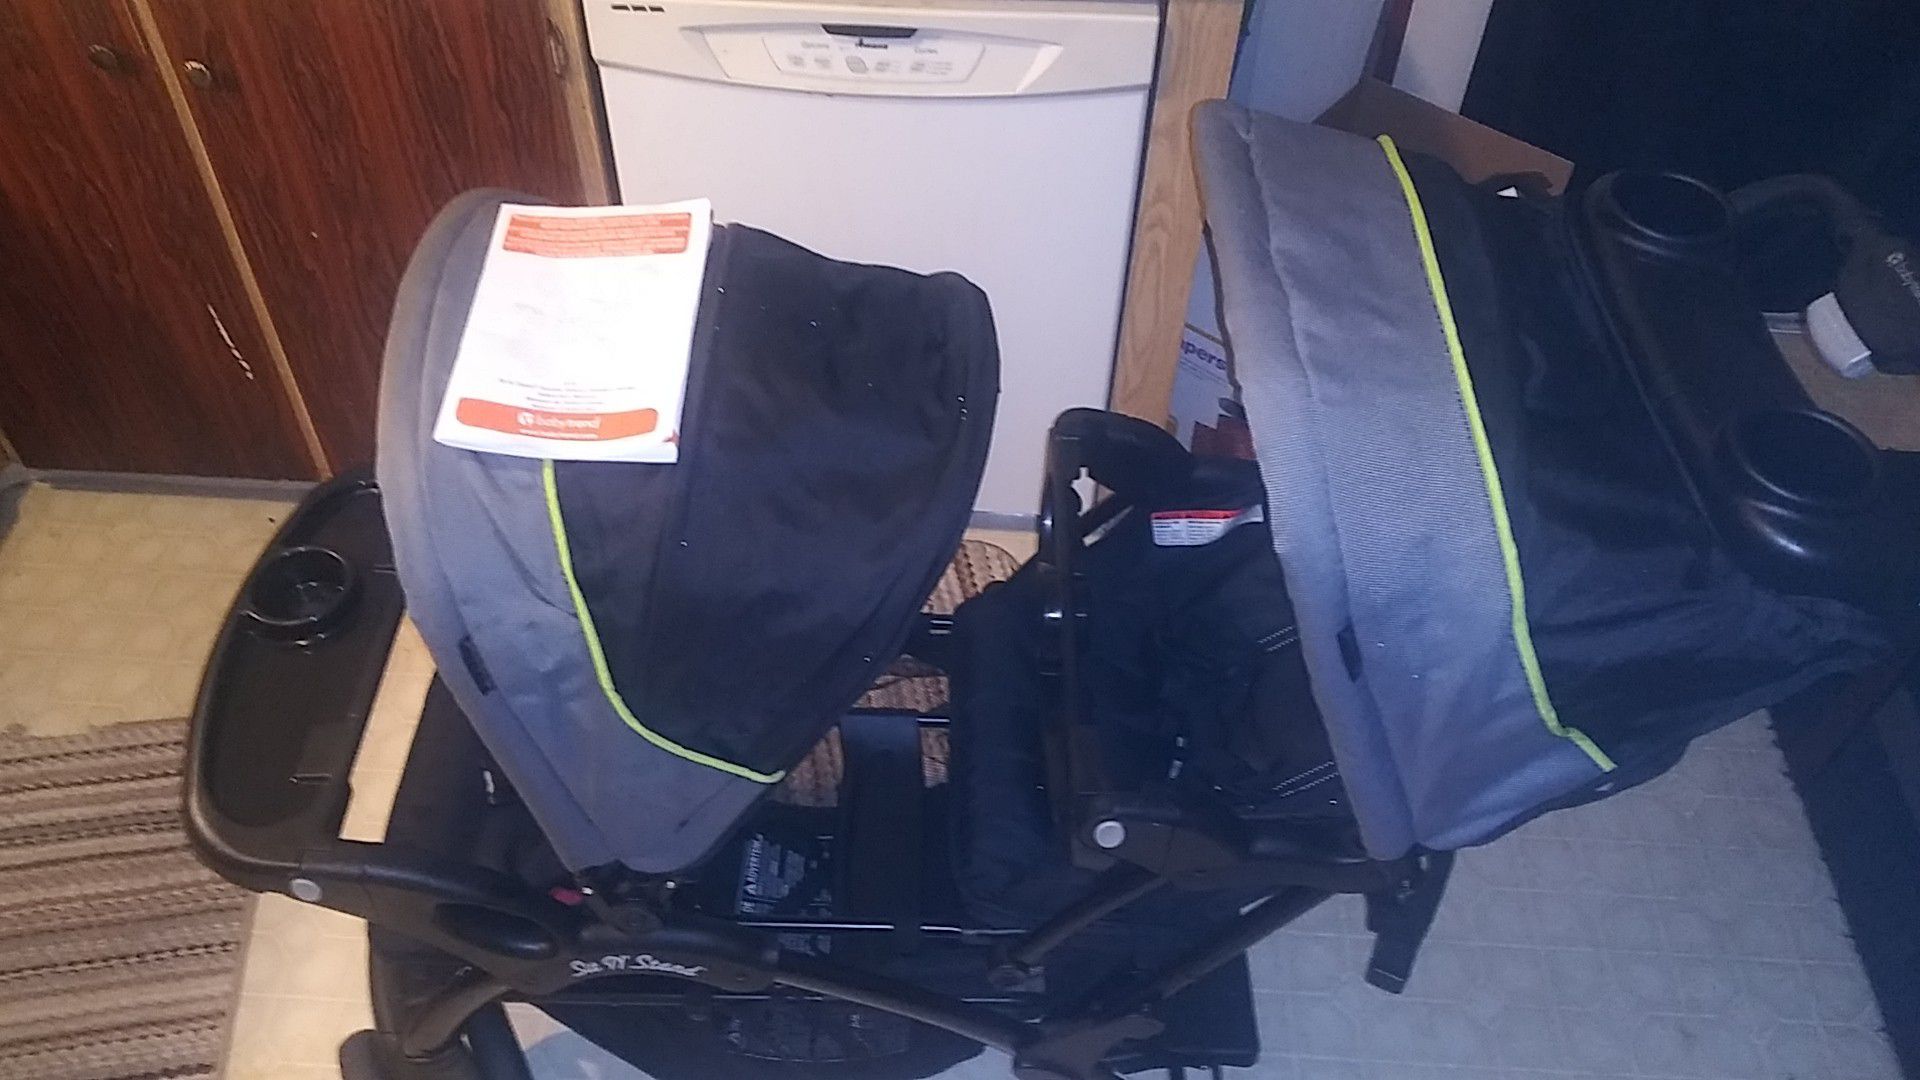 Double stroller brand new never been used